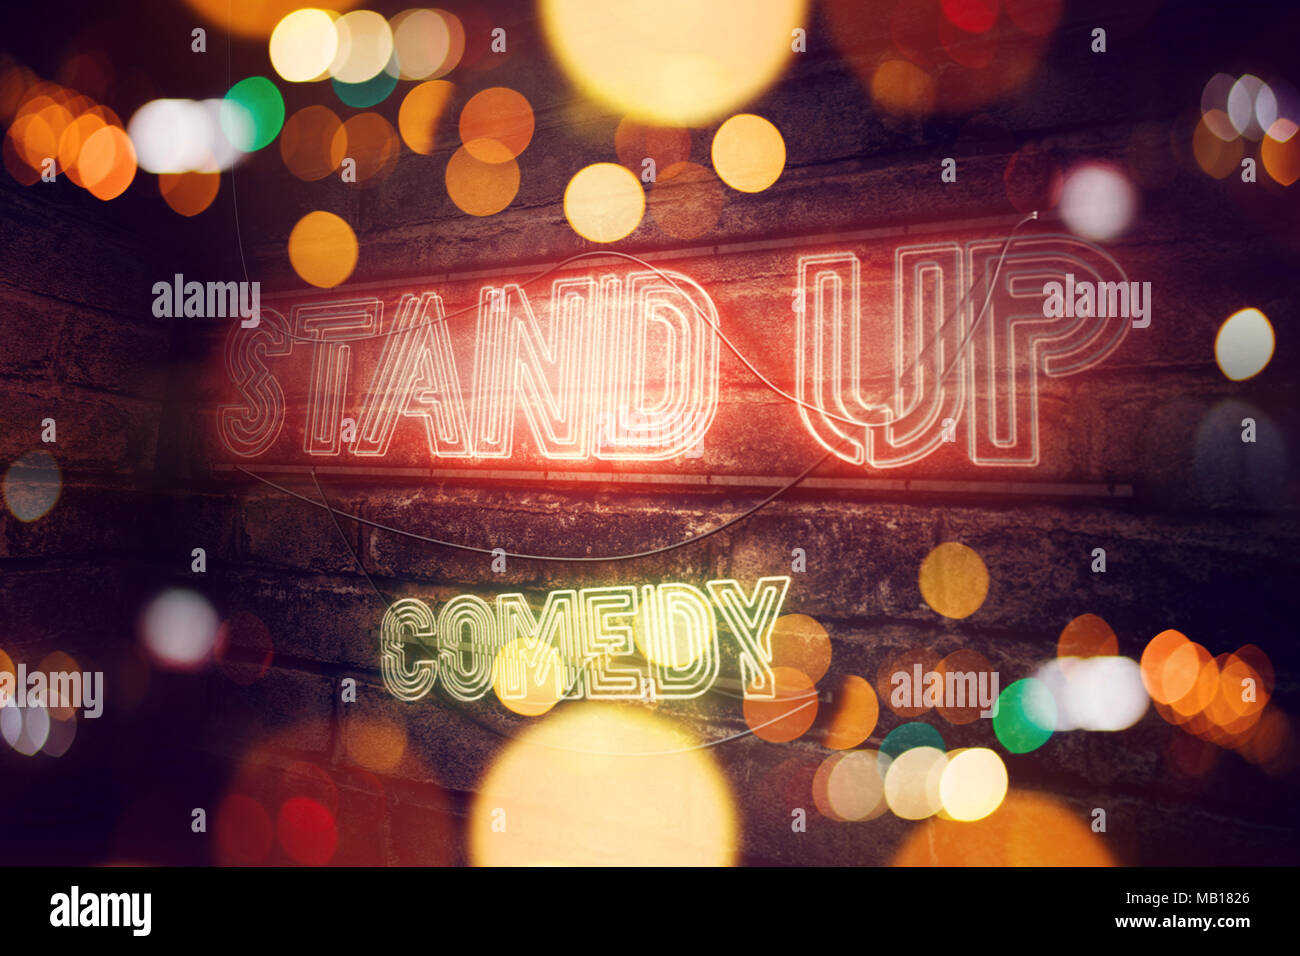 Stand Up Comedy neon sign conceptual 3d rendering illustration Stock Photo